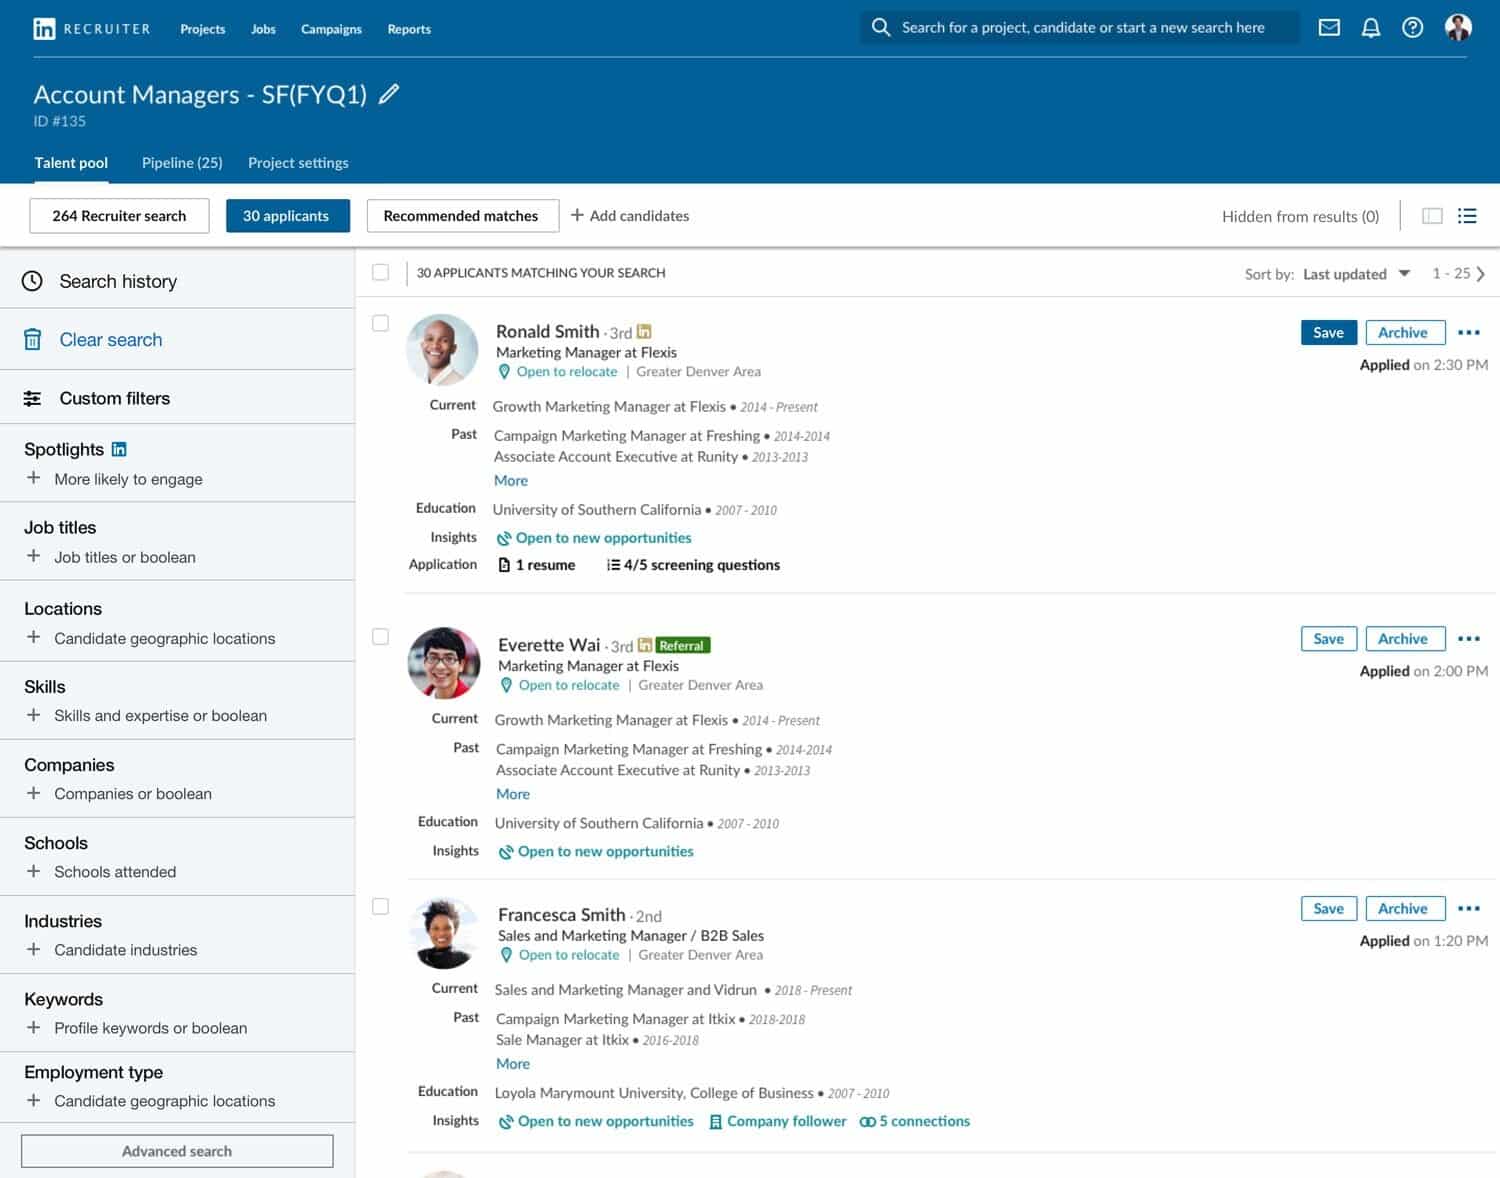 Recruitment automation: search for candidates with LinkedIn Recruiter.